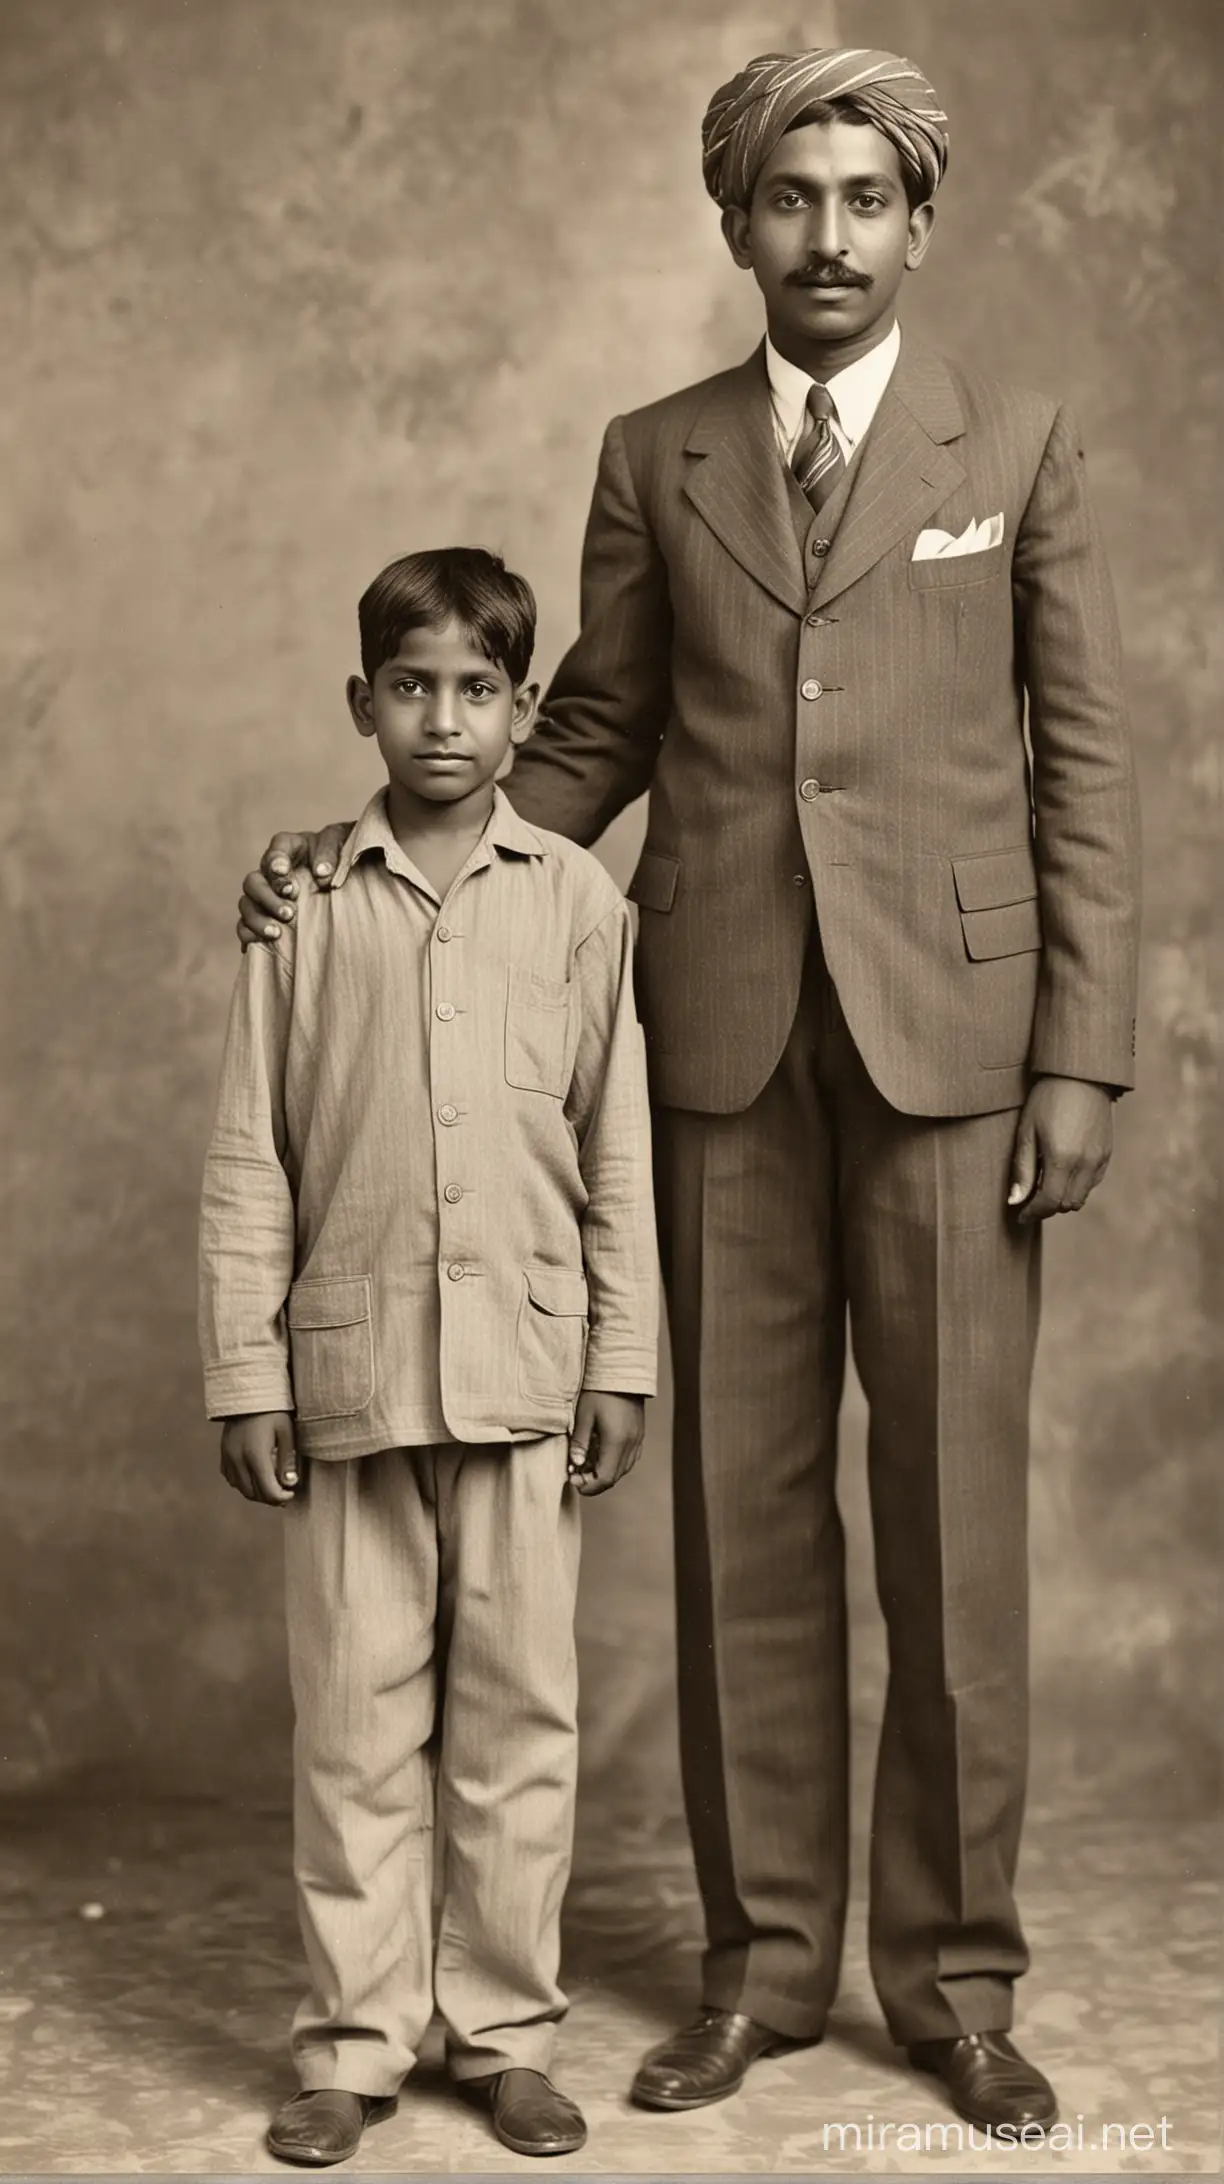 Indian Father and Son Standing in 1930s Era